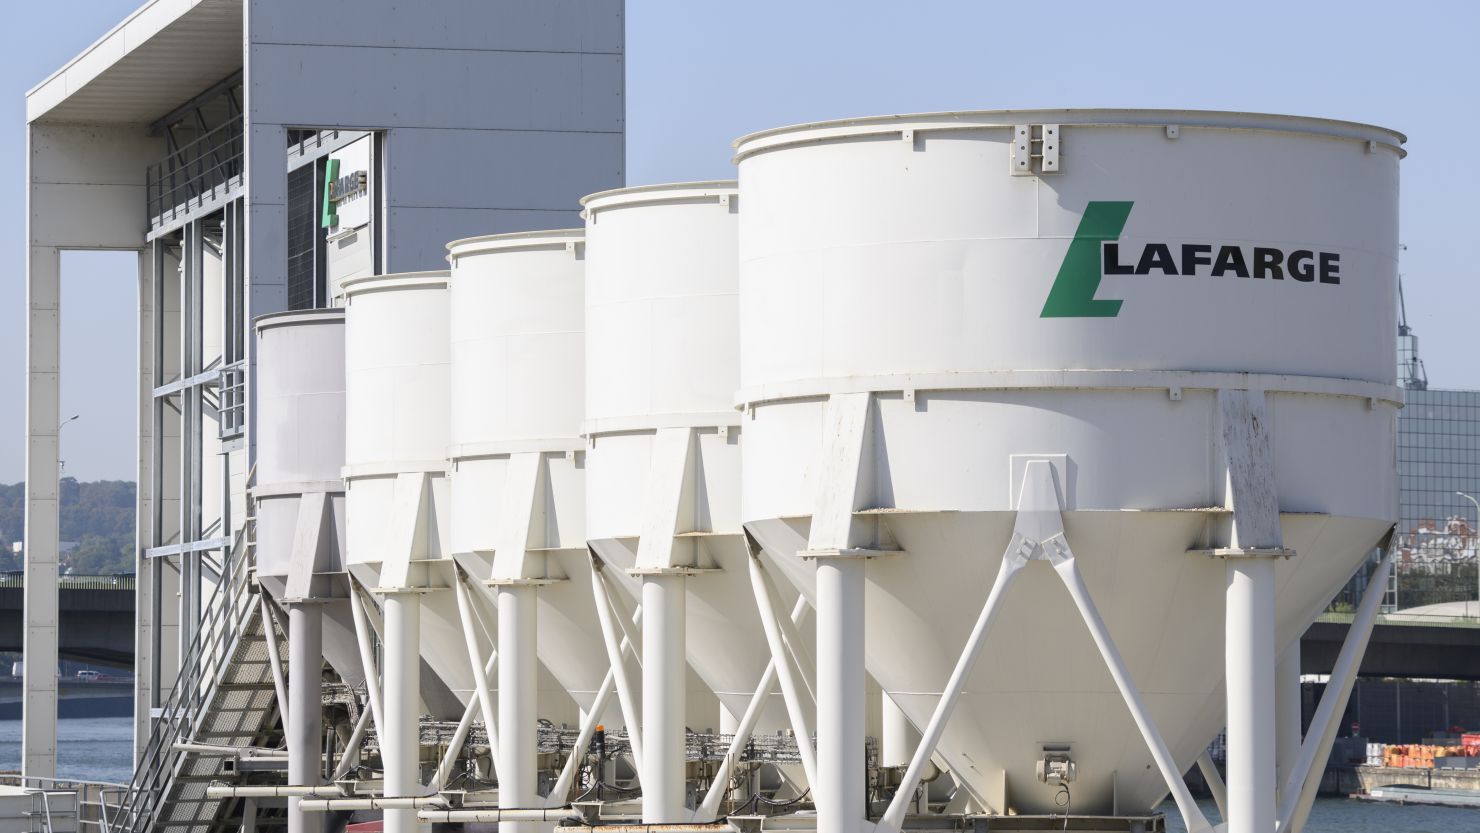 Lafarge cement 0921 FILE RESTRICTED